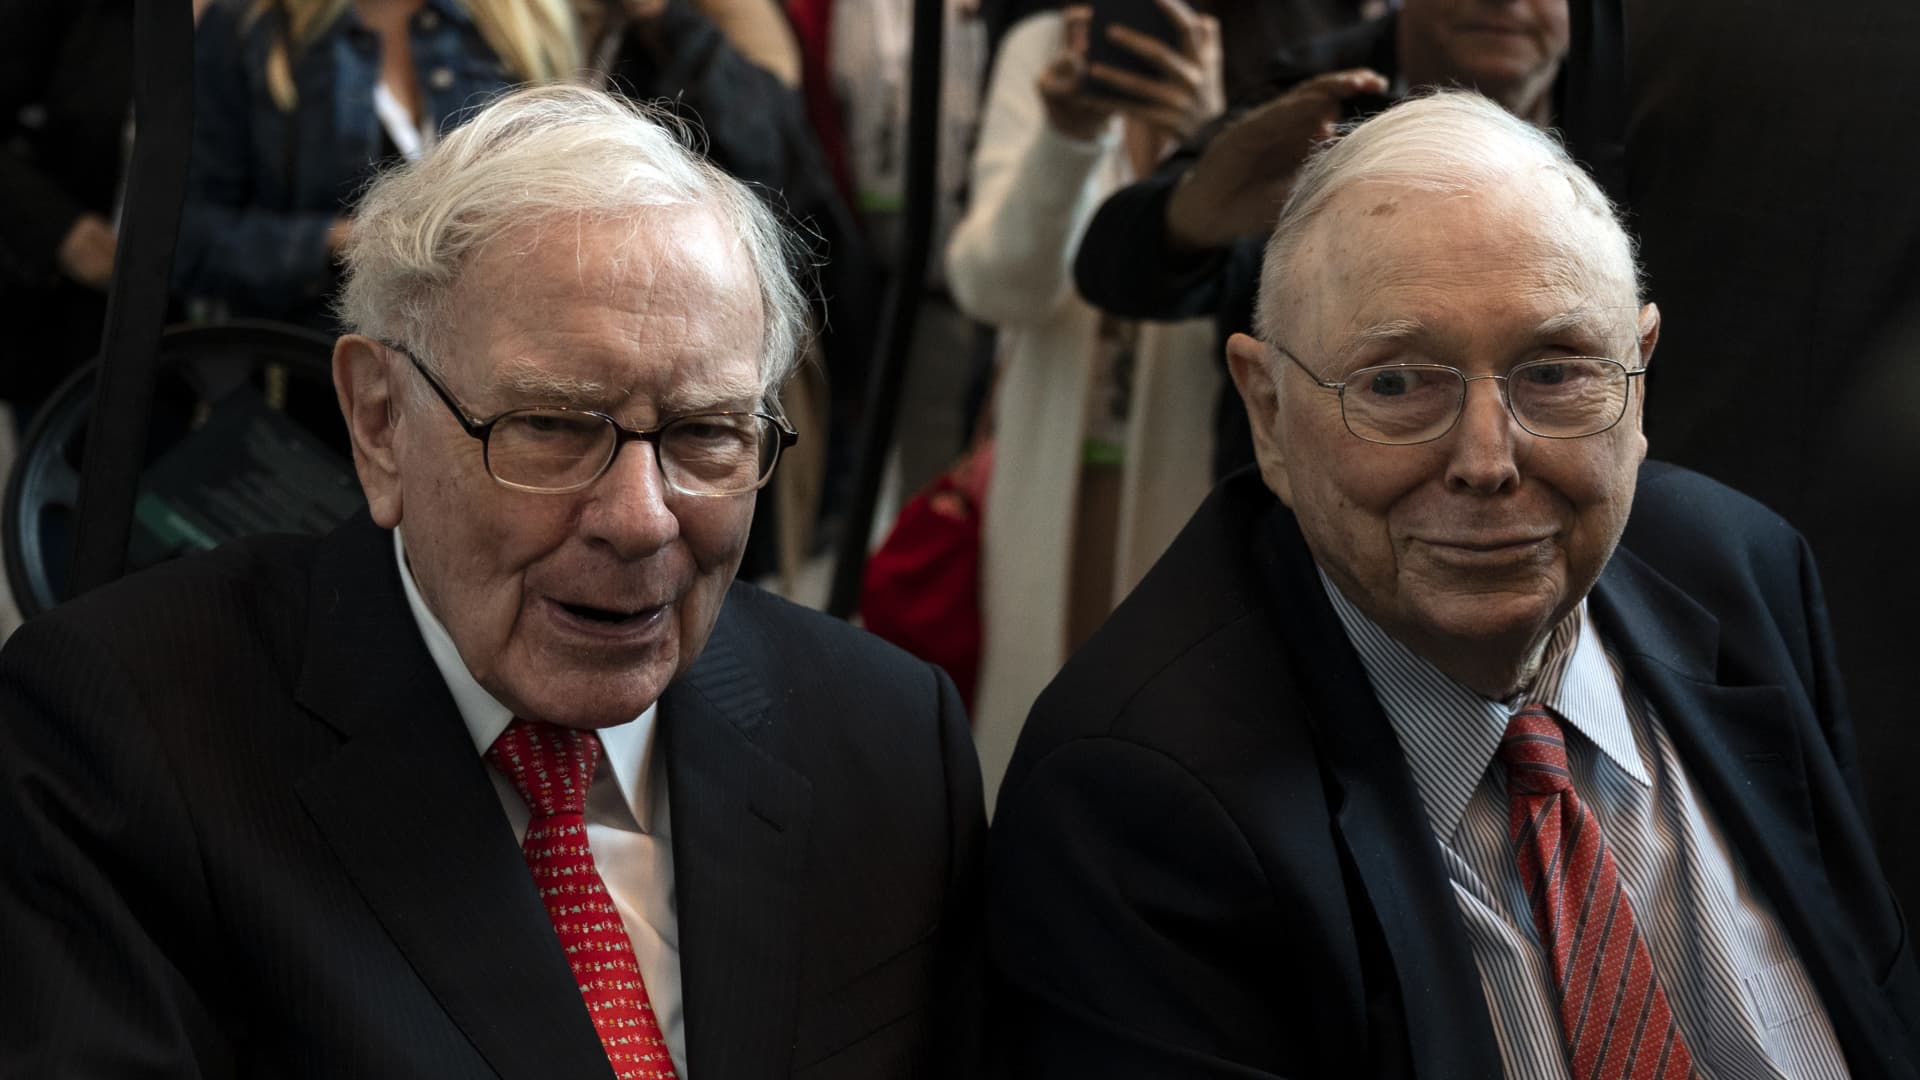 How Munger and Buffett's 60-year partnership was special: 'Charlie and I have never had an argument'